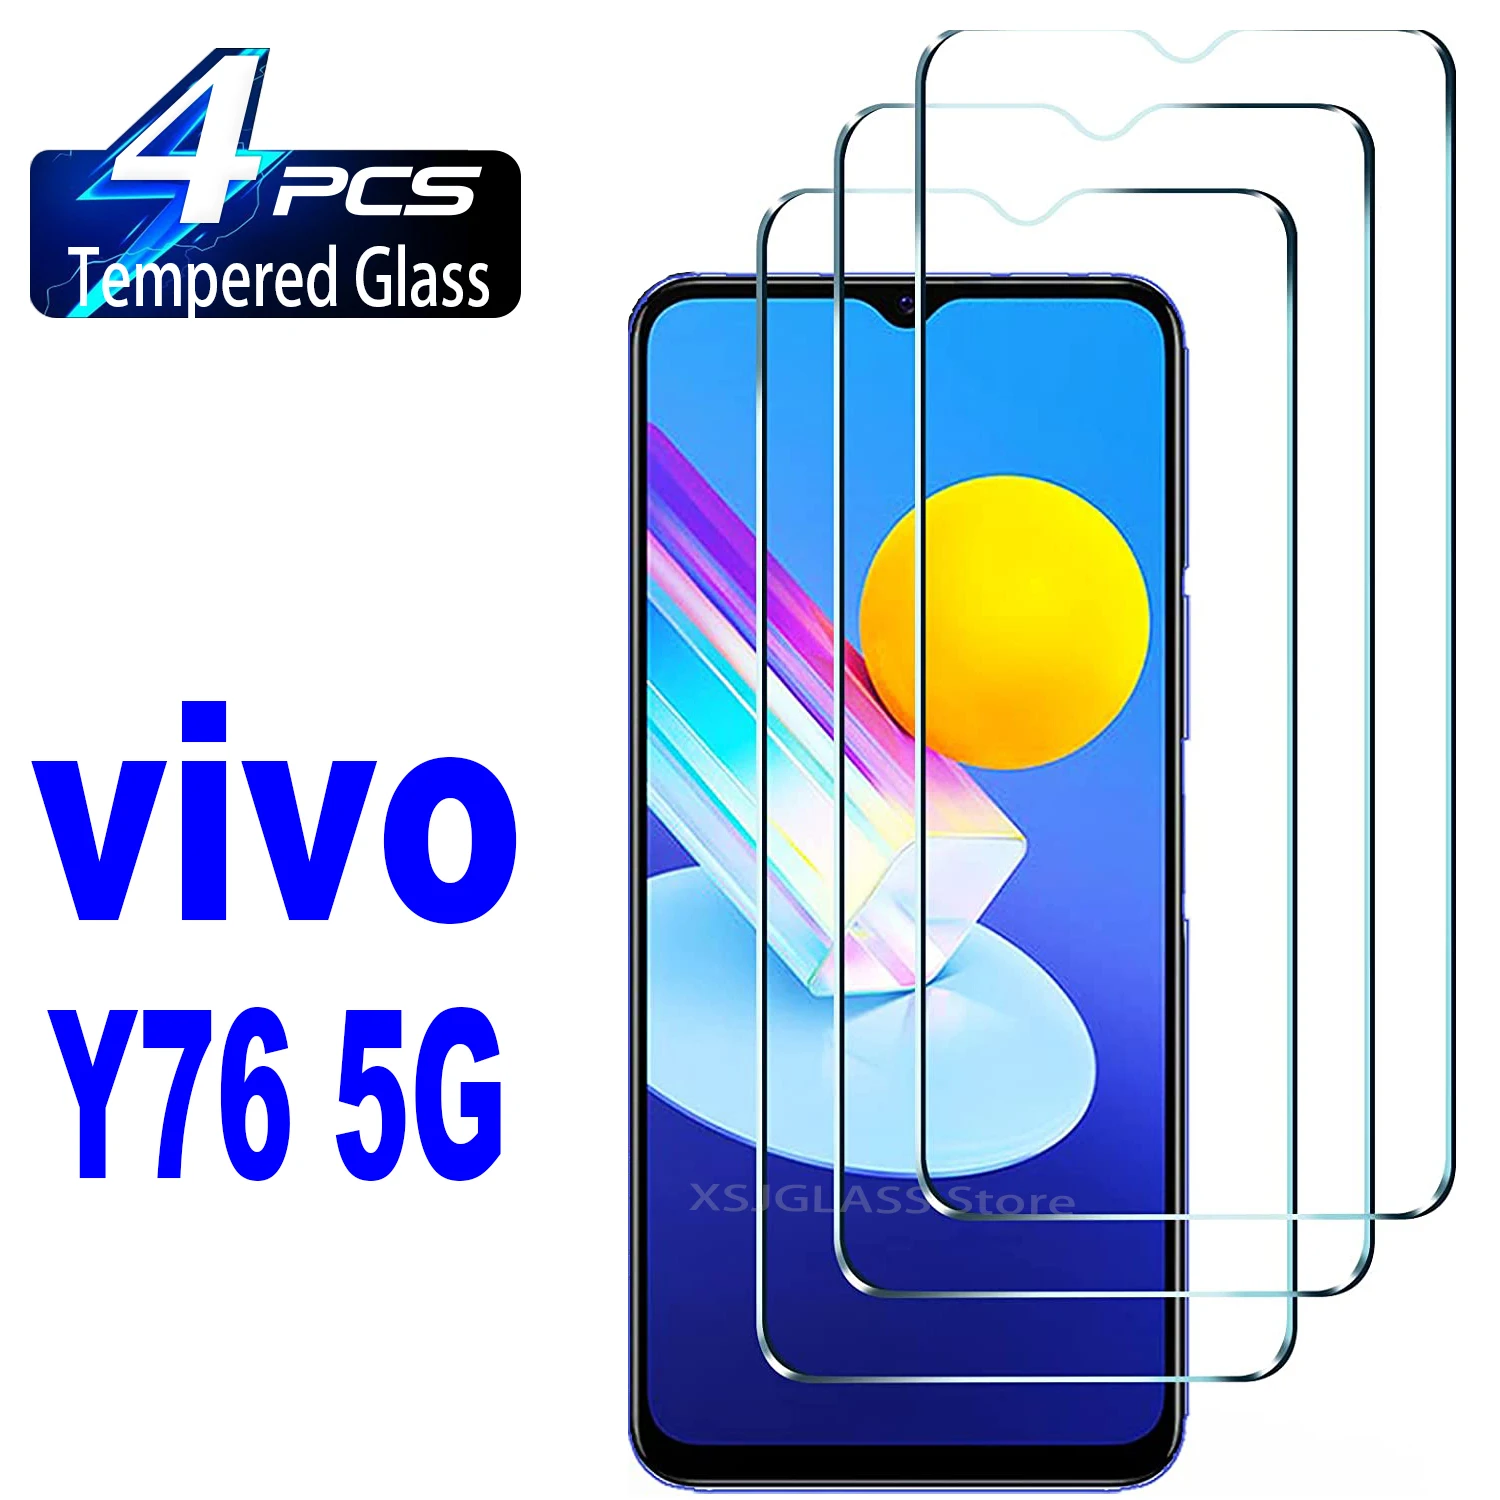 2/4Pcs Tempered Glass For Vivo Y76 5G Screen Protector Glass Film